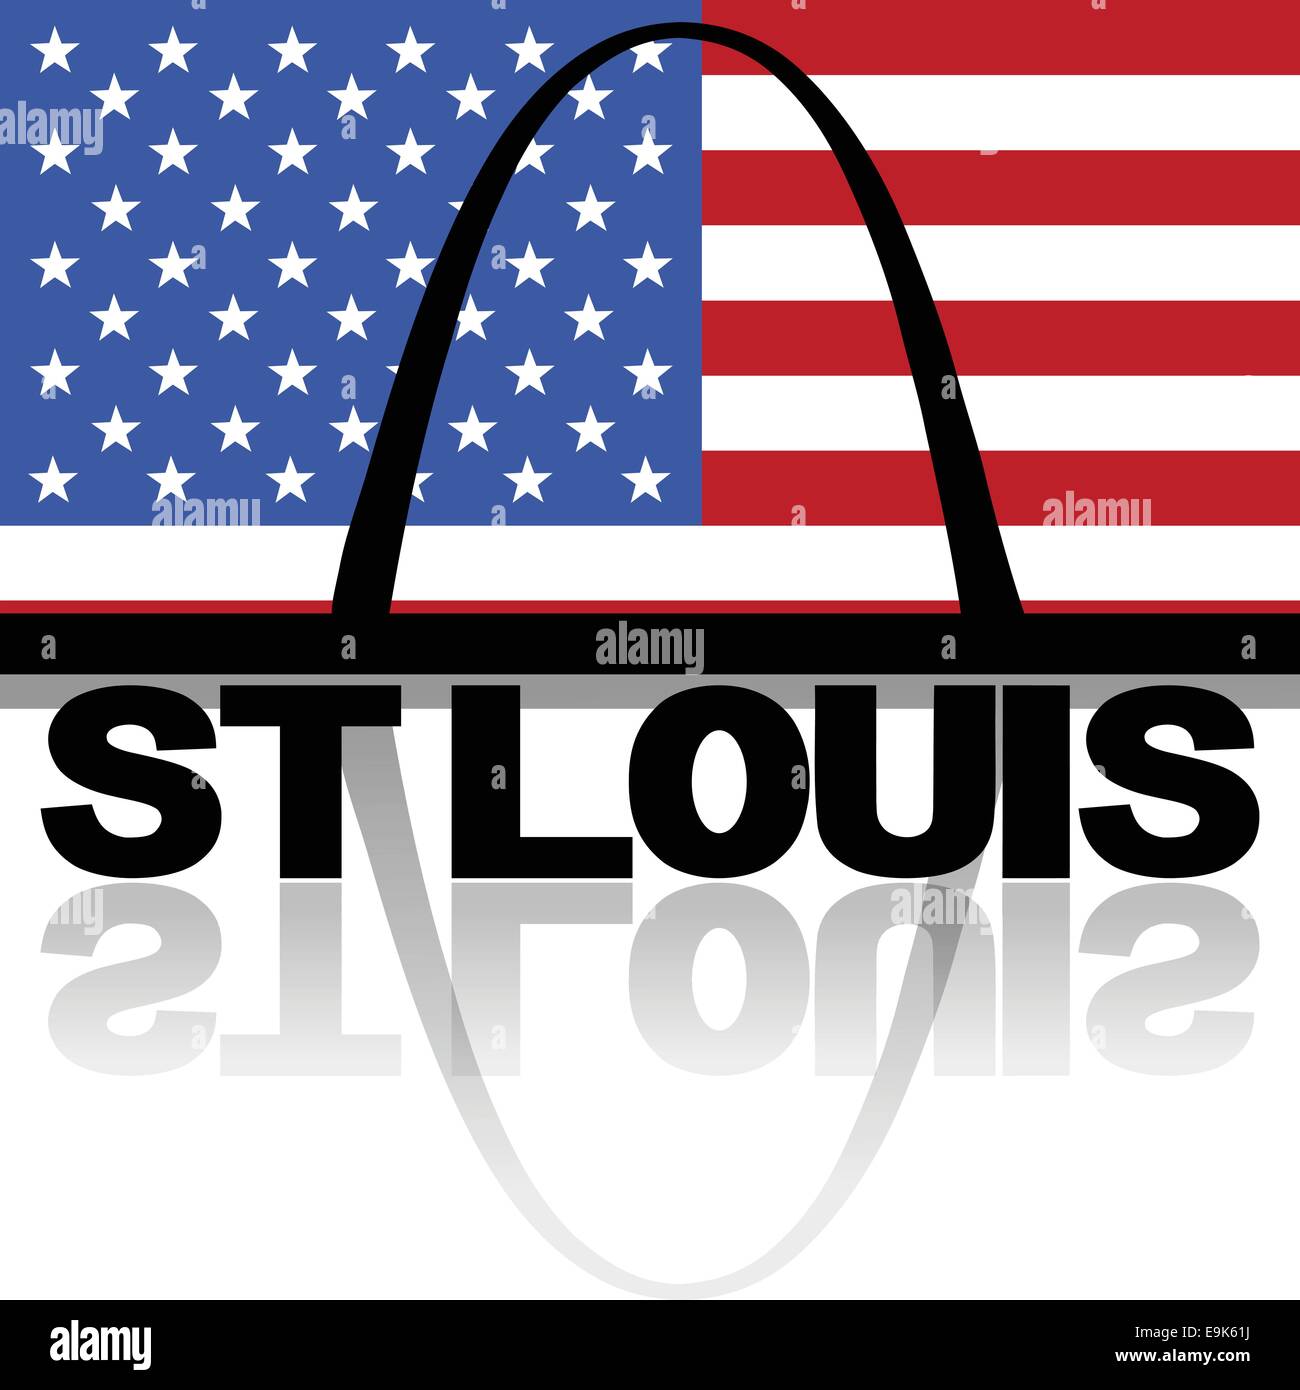 File:East St. louis flag.gif - Wikimedia Commons